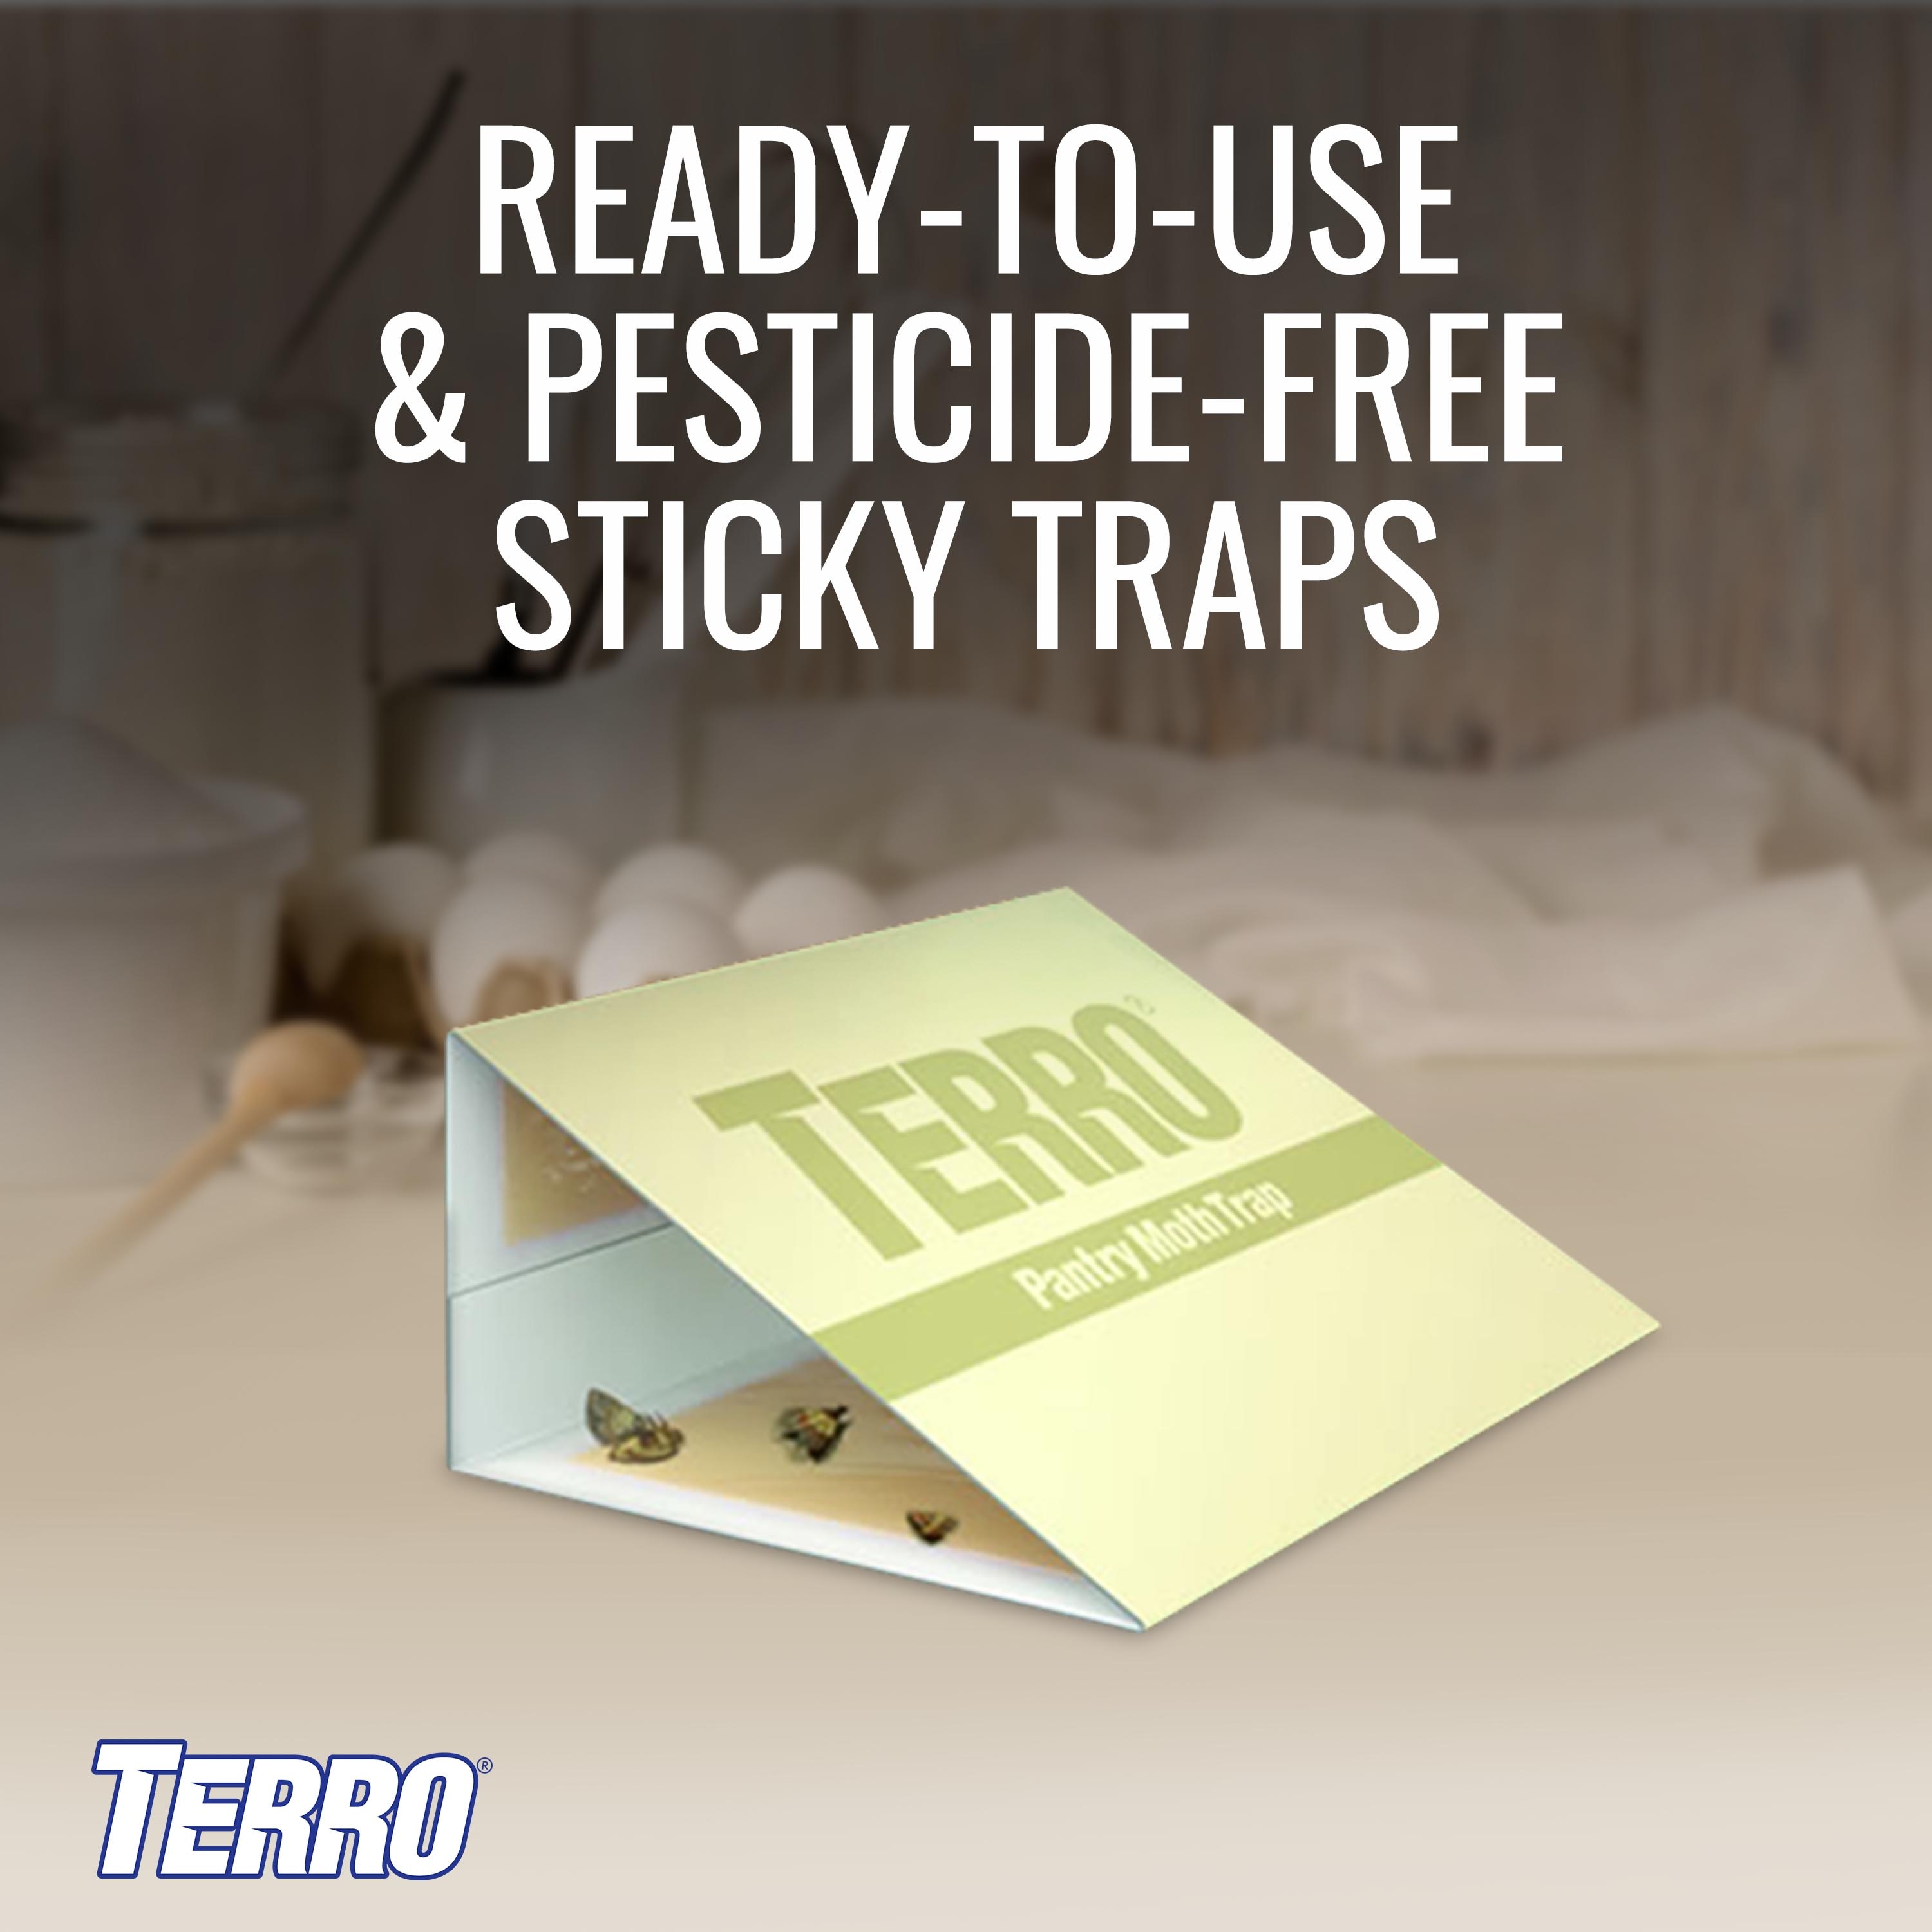 TERRO Pantry Moth Indoor Insect Trap (2-Pack) in the Insect Traps  department at